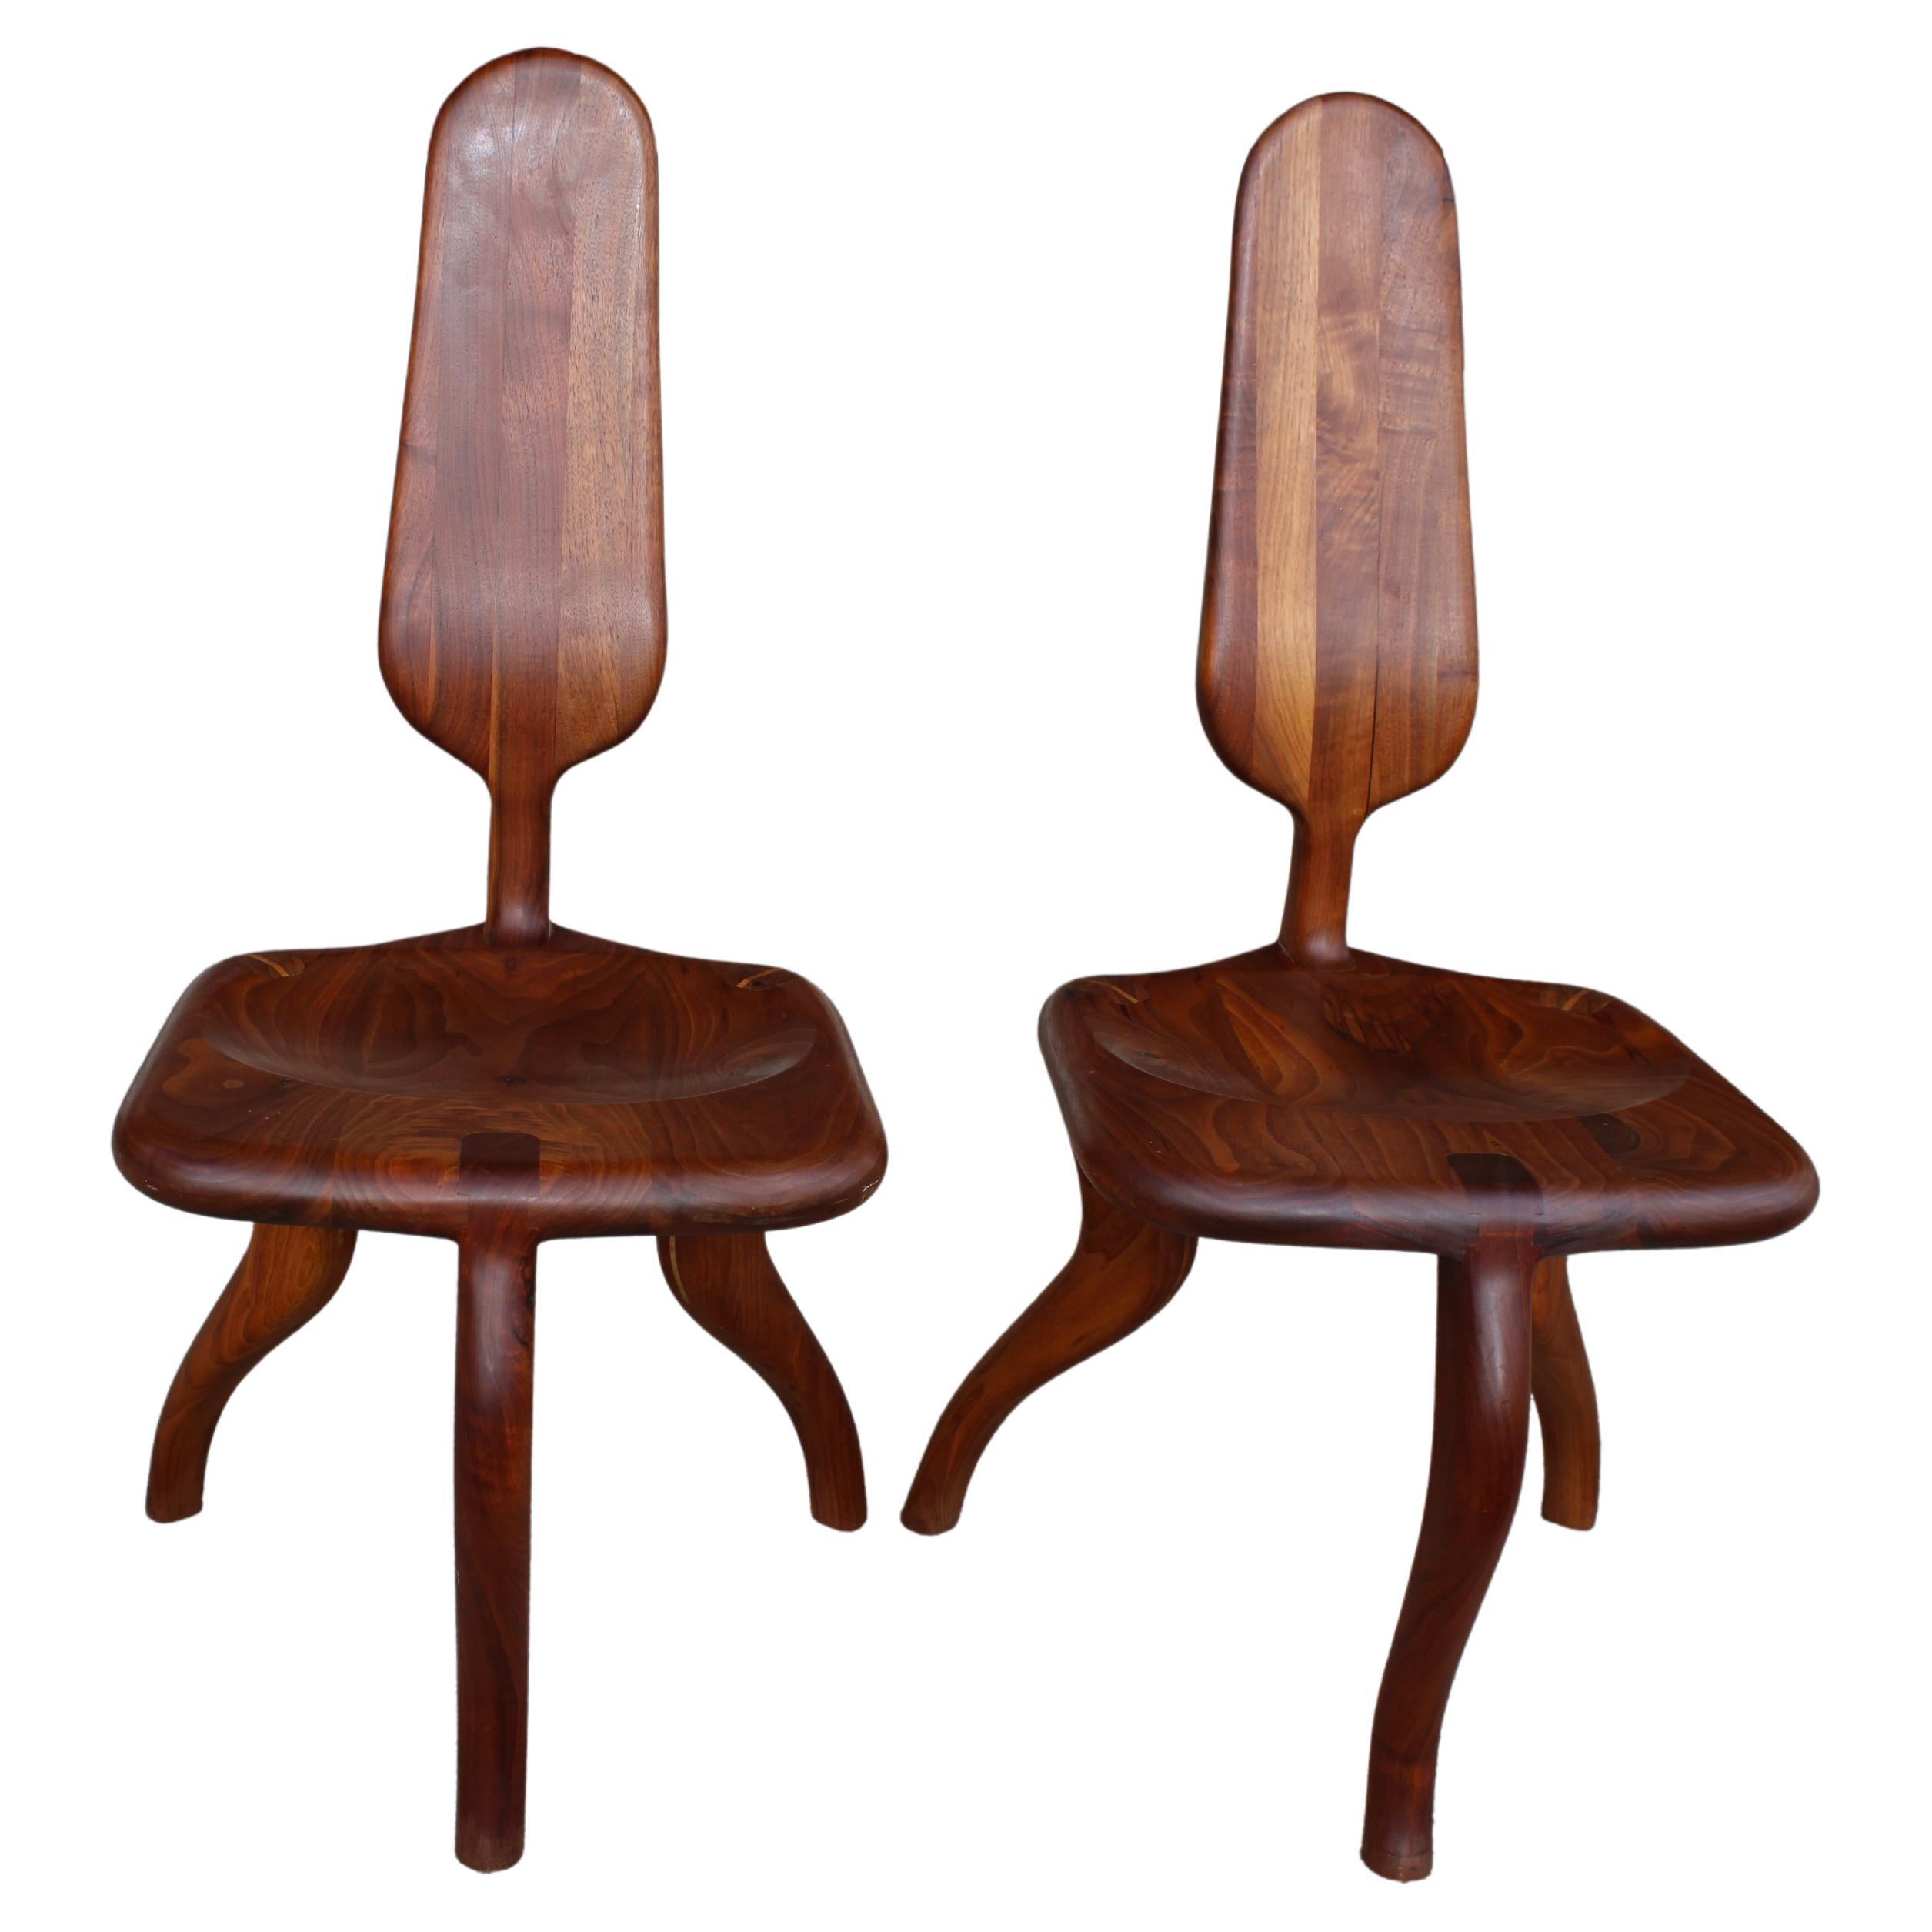 Pair of Whimsical Studio Wood Chairs